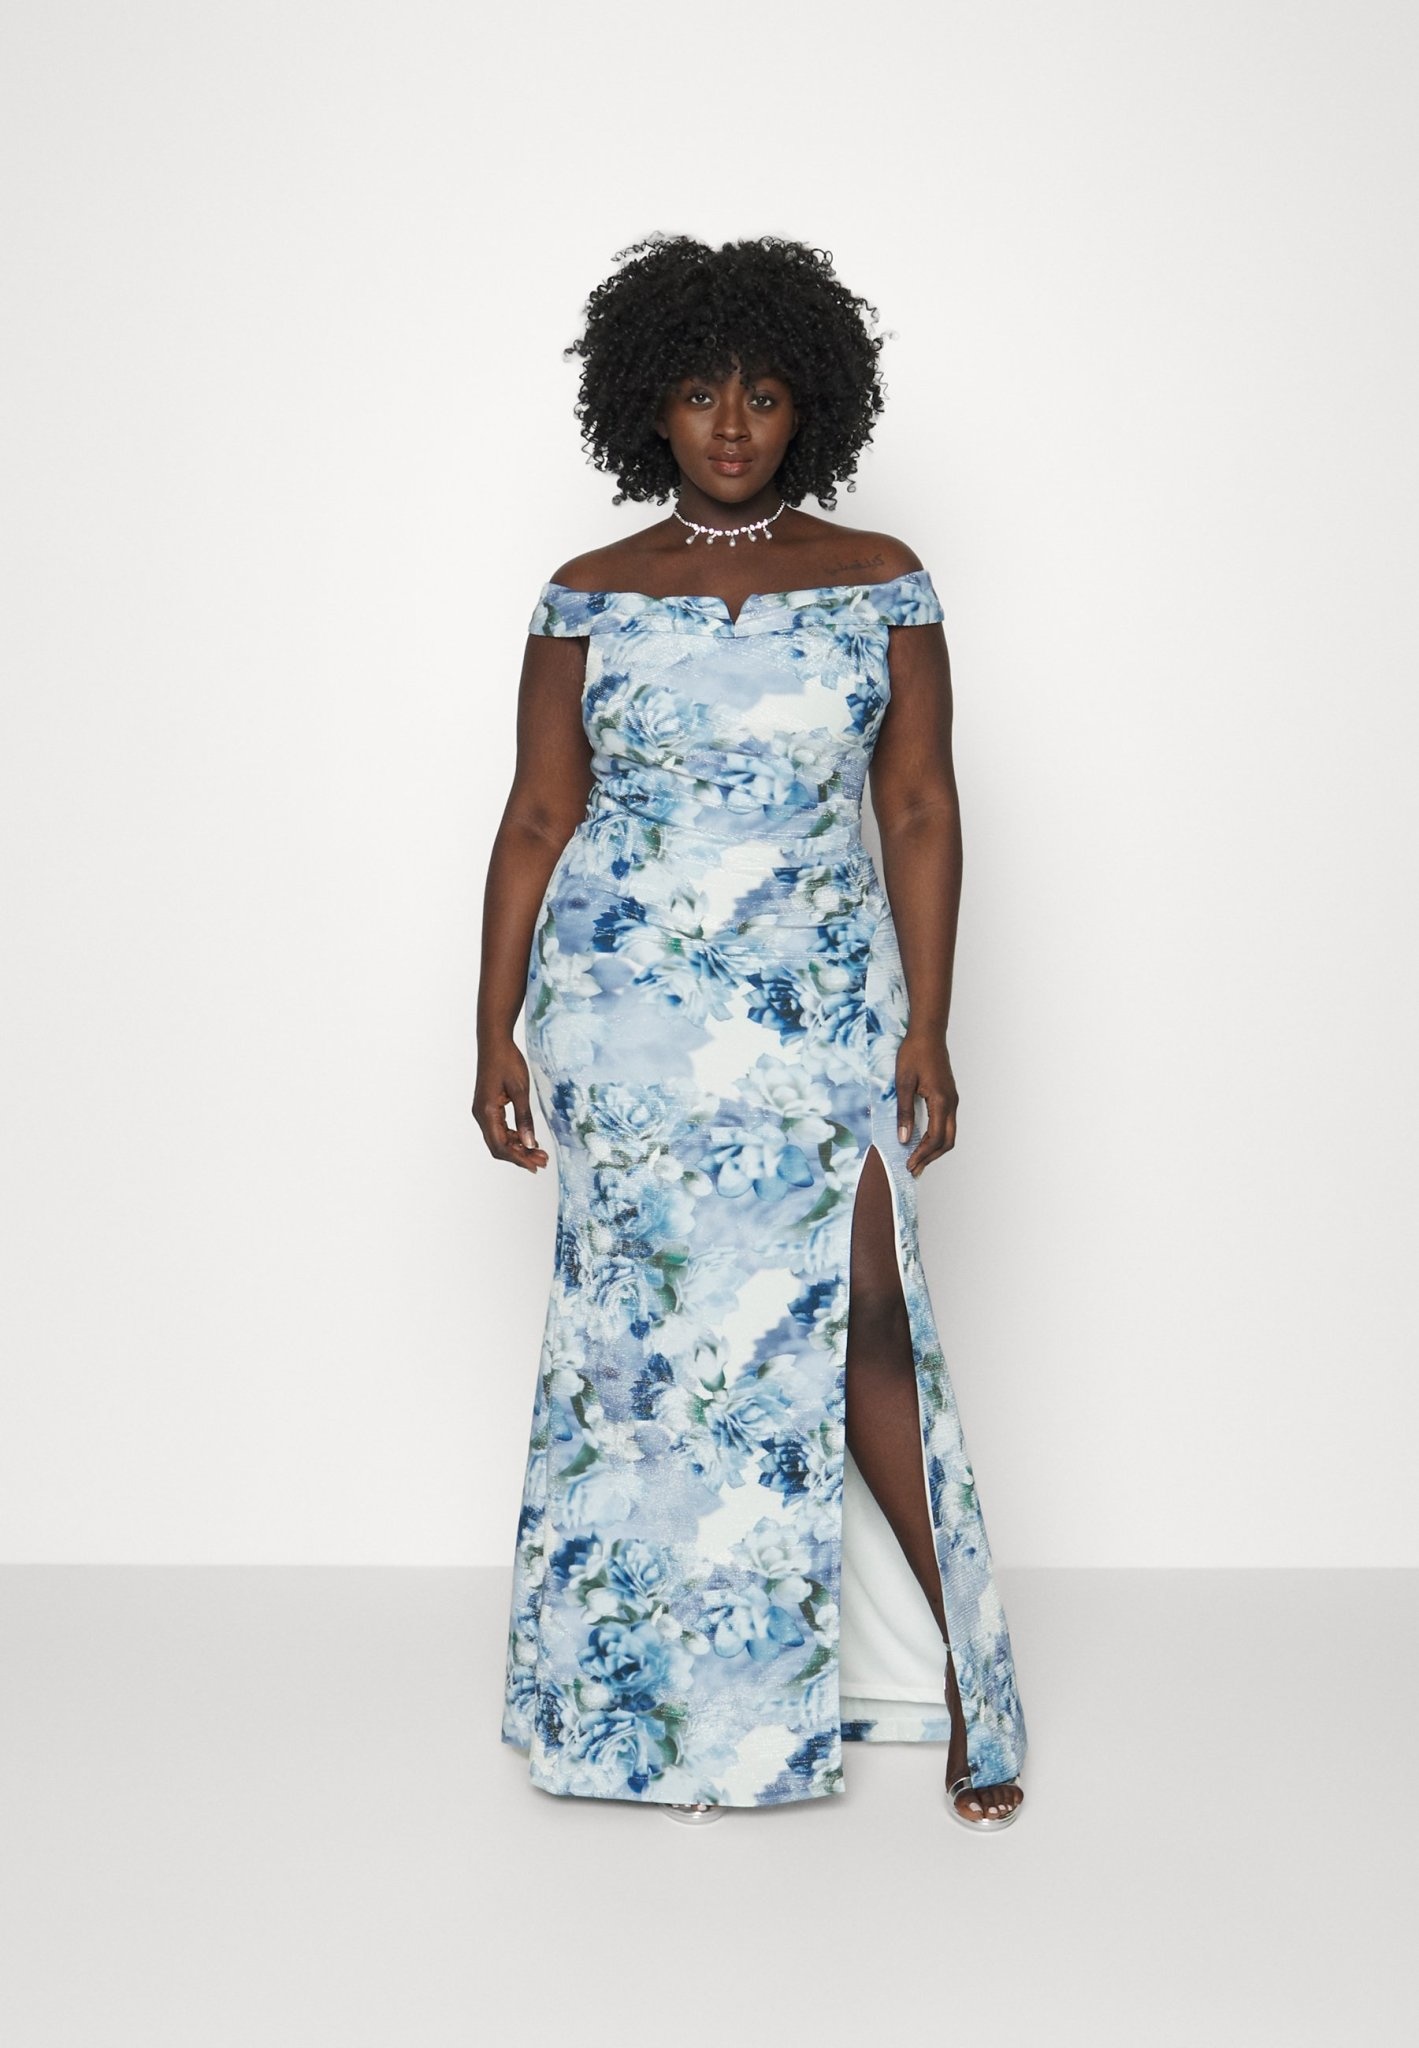 ADRIANNA PAPELL ADRIANNA PAPELL FLORAL METALIC GOWN DRESSES